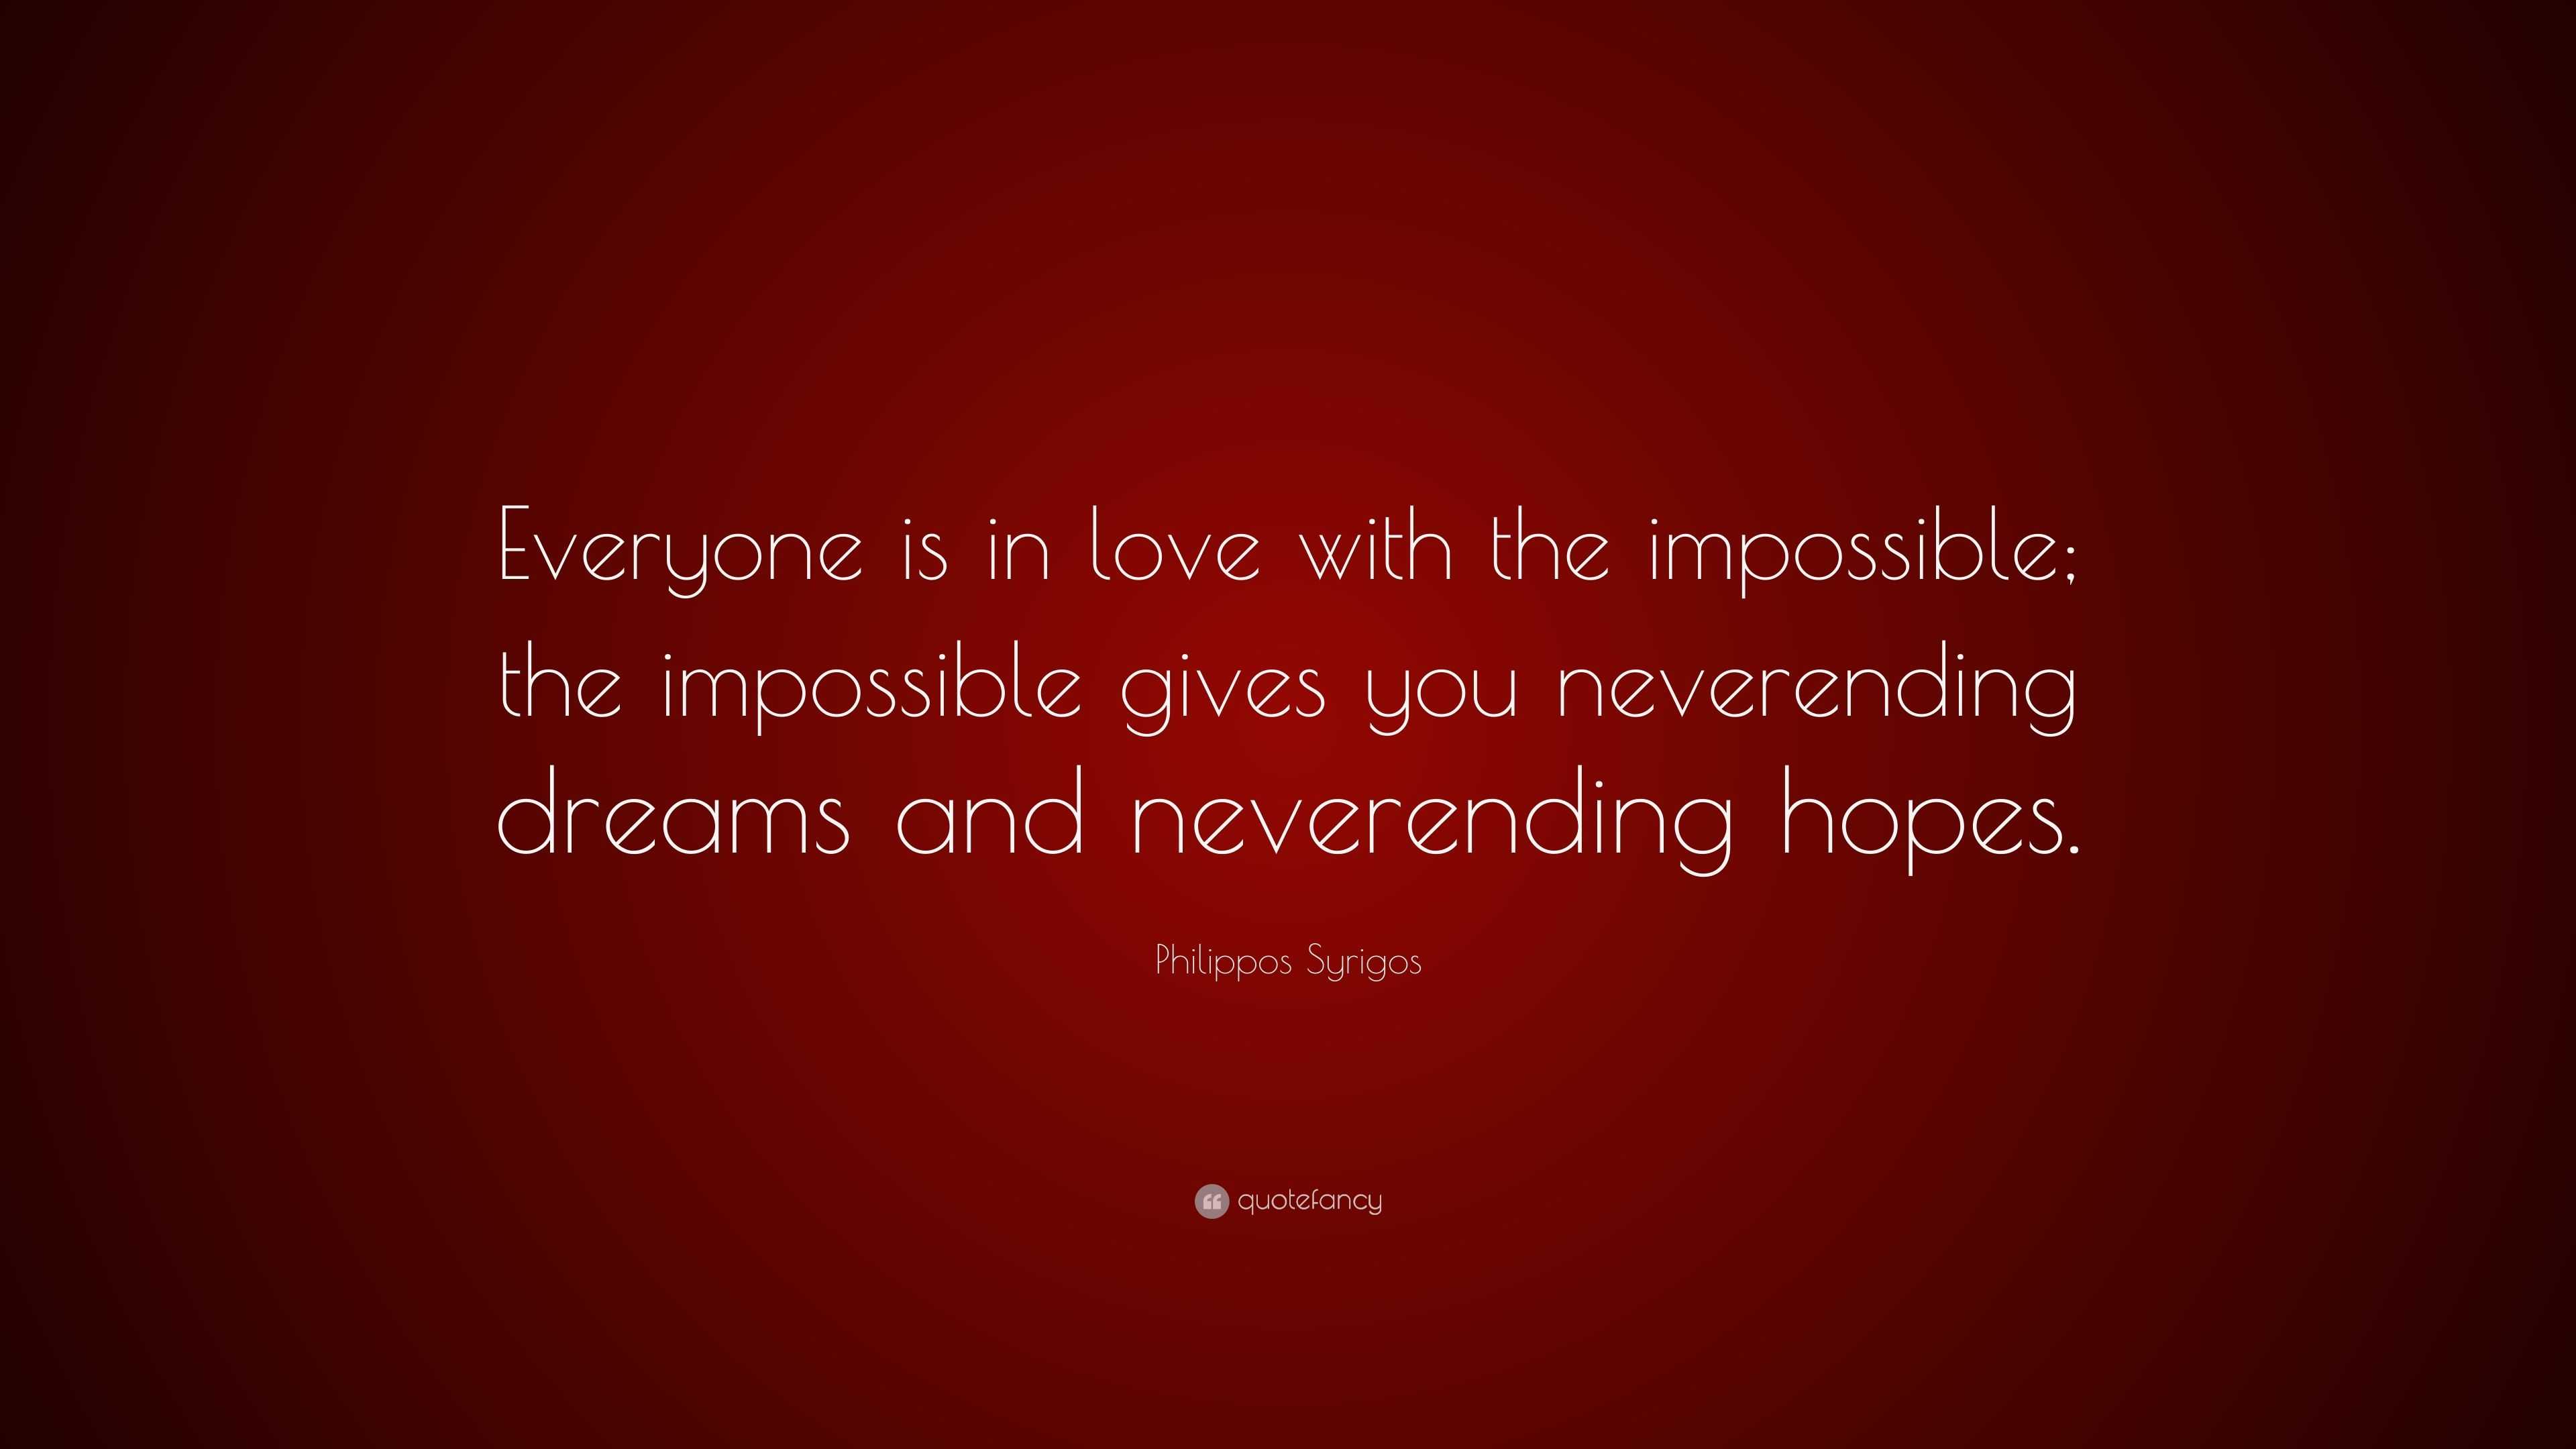 Philippos Syrigos Quote “Everyone is in love with the impossible the impossible gives